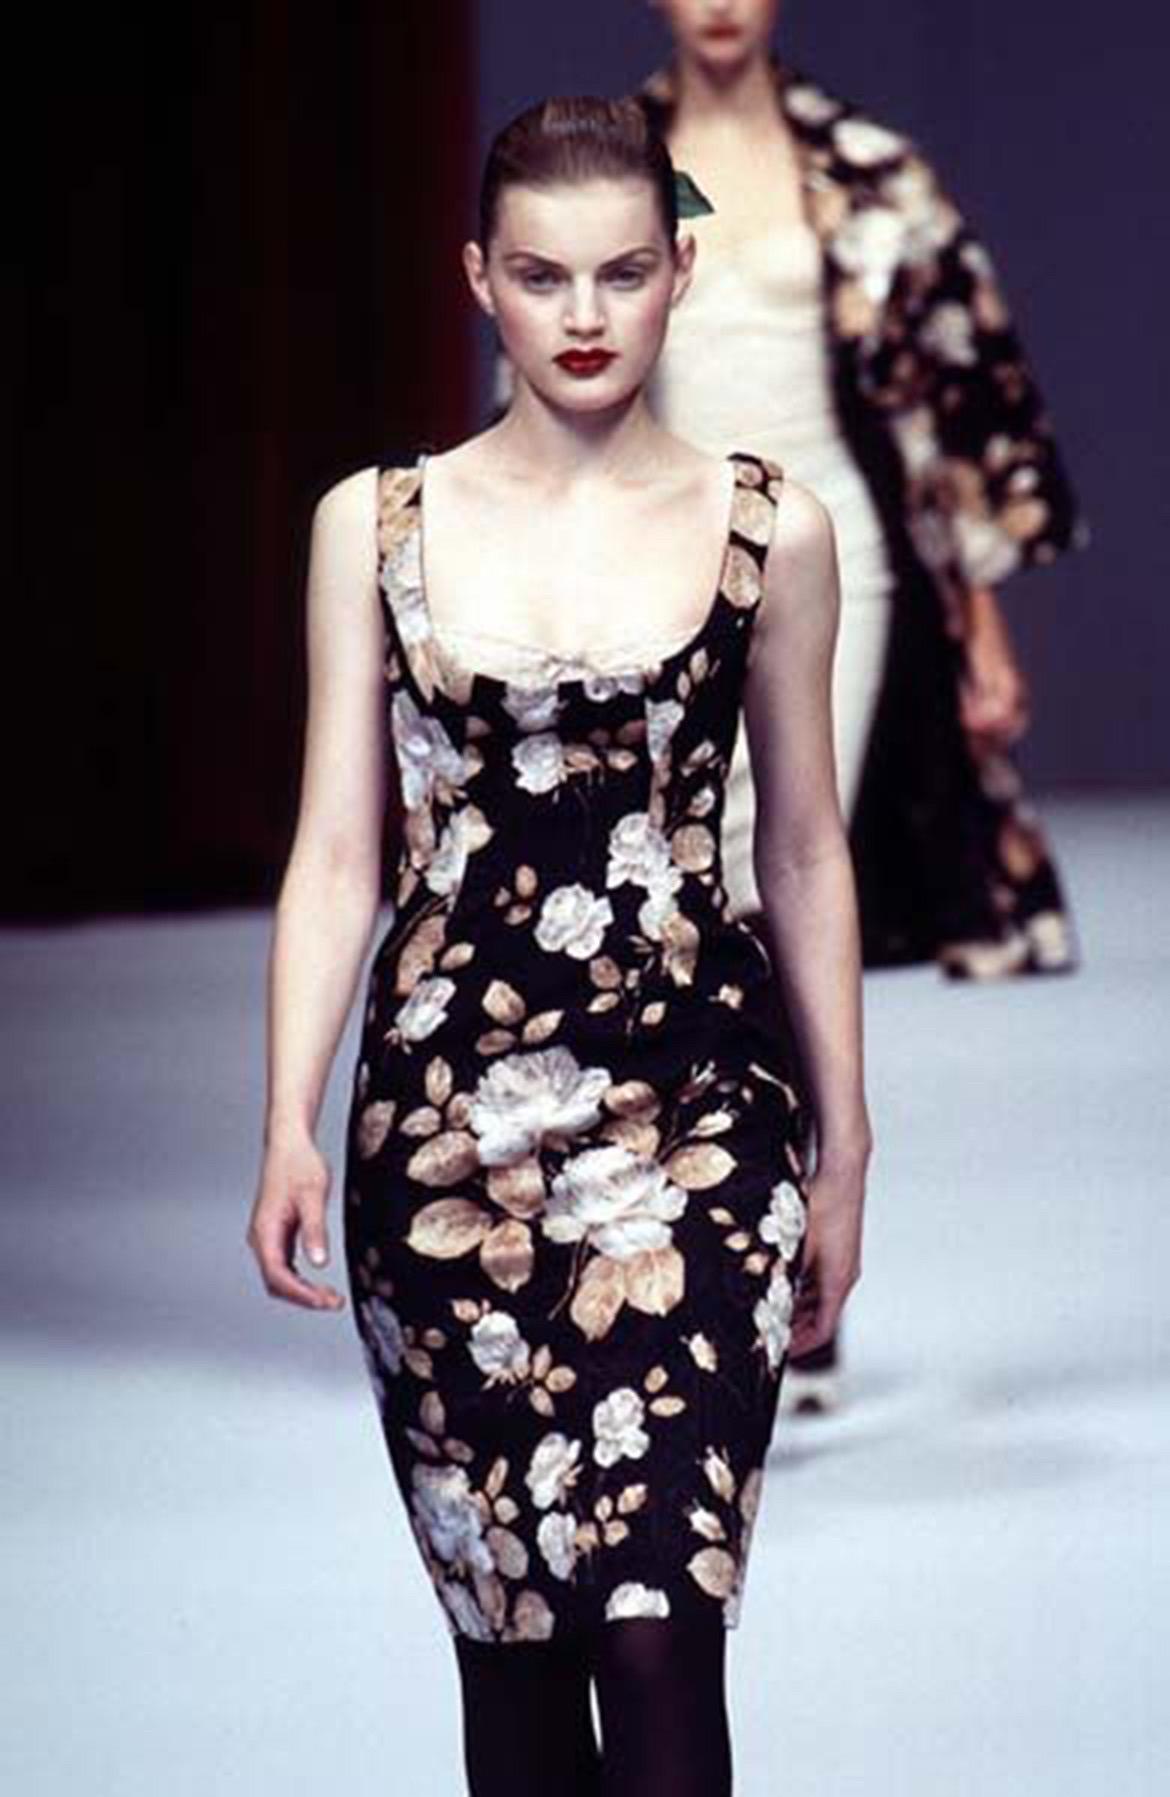 An ultra seductive and instantly recognizable Dolce & Gabbana floral print stretch velvet bustier bra-strap slip dress dating back to their 1997 spring-summer collection. This design debuted on the runway in multiple similar floral fabric patterns.